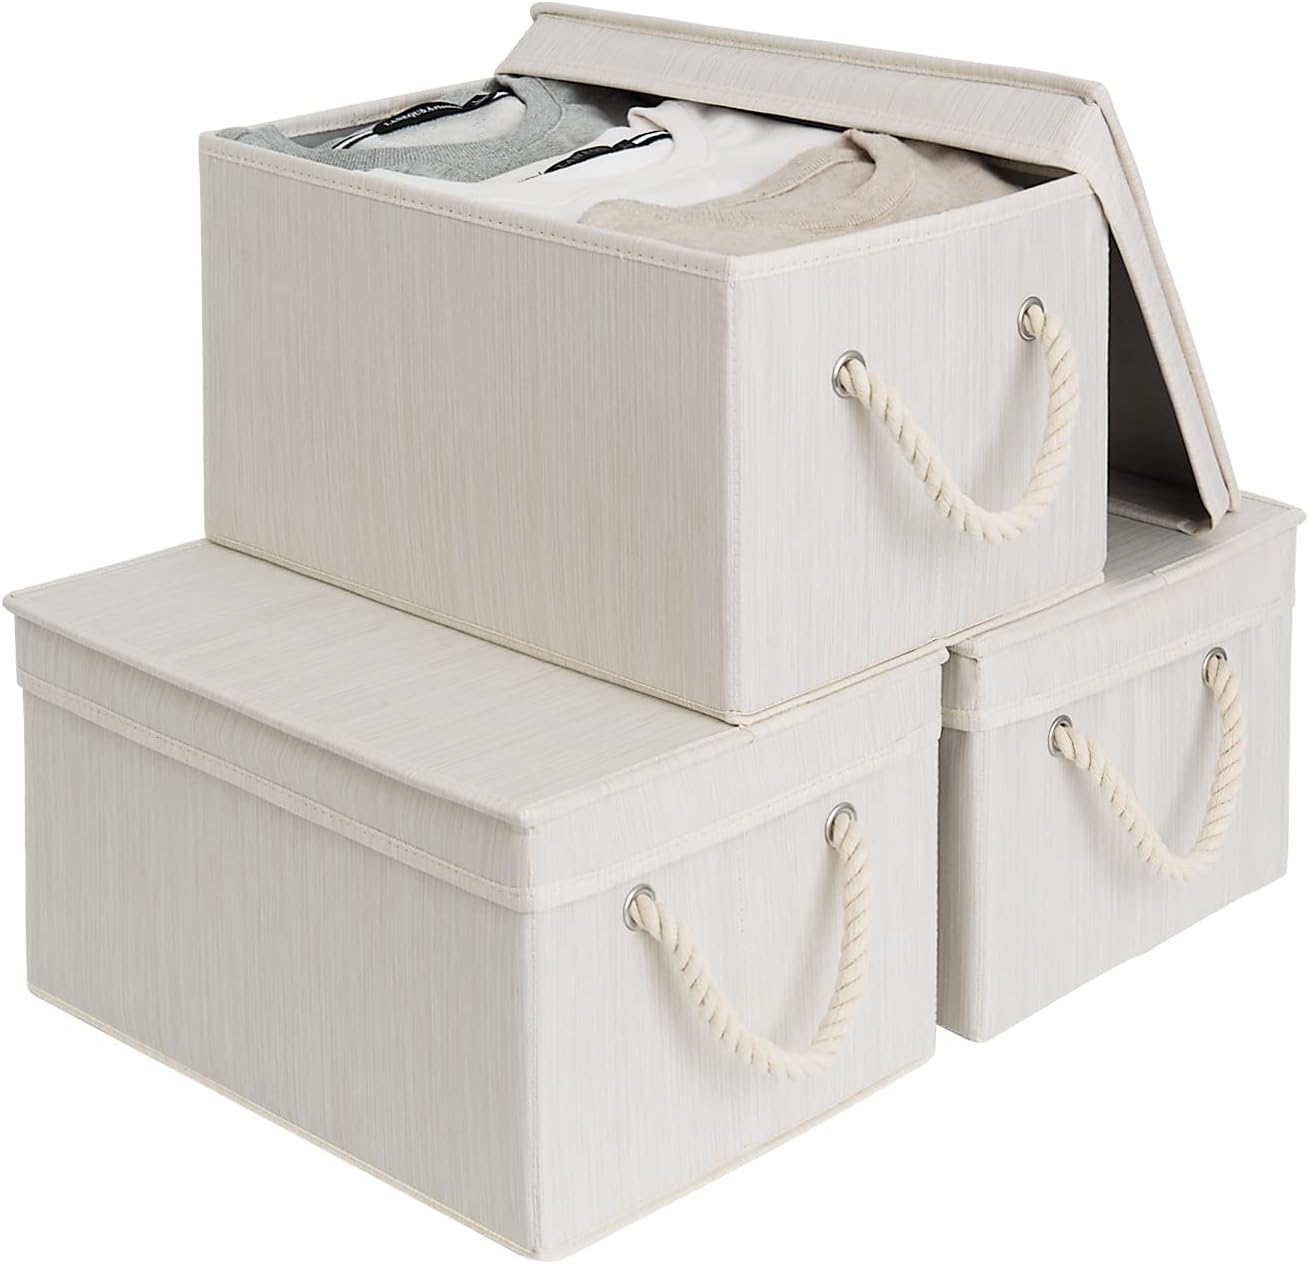 StorageWorks Storage Bins with Lids, Decorative Storage Boxes with Lids and Soft Rope Handles, Mixing of Beige, White & Ivory, Large, 3-Pack